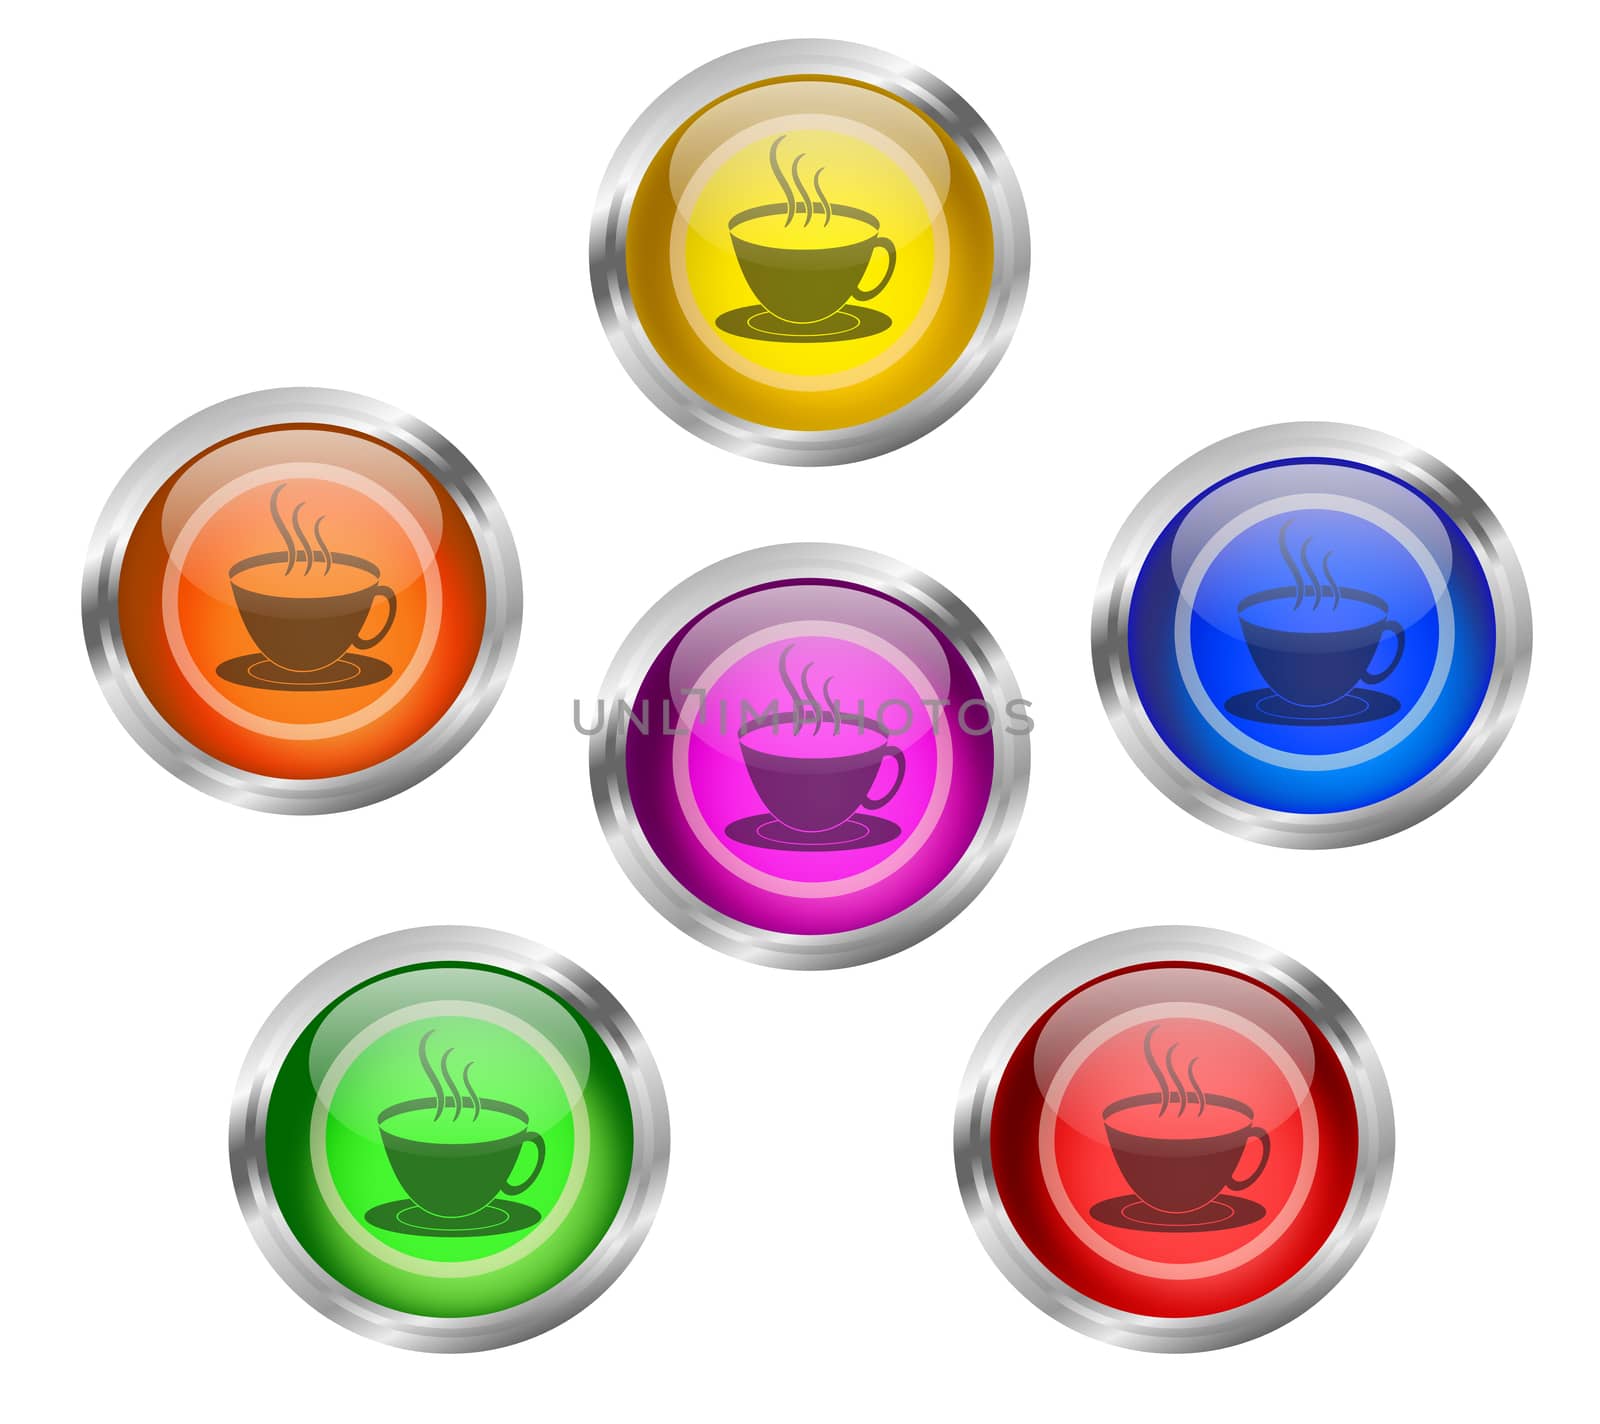 Set of shiny tea or coffee cup round web icon buttons in six different colors - yellow, orange, red, green, pink blue, with silver or chrome metallic rim. Can be used on menu and banners of caf� and restaurant.
